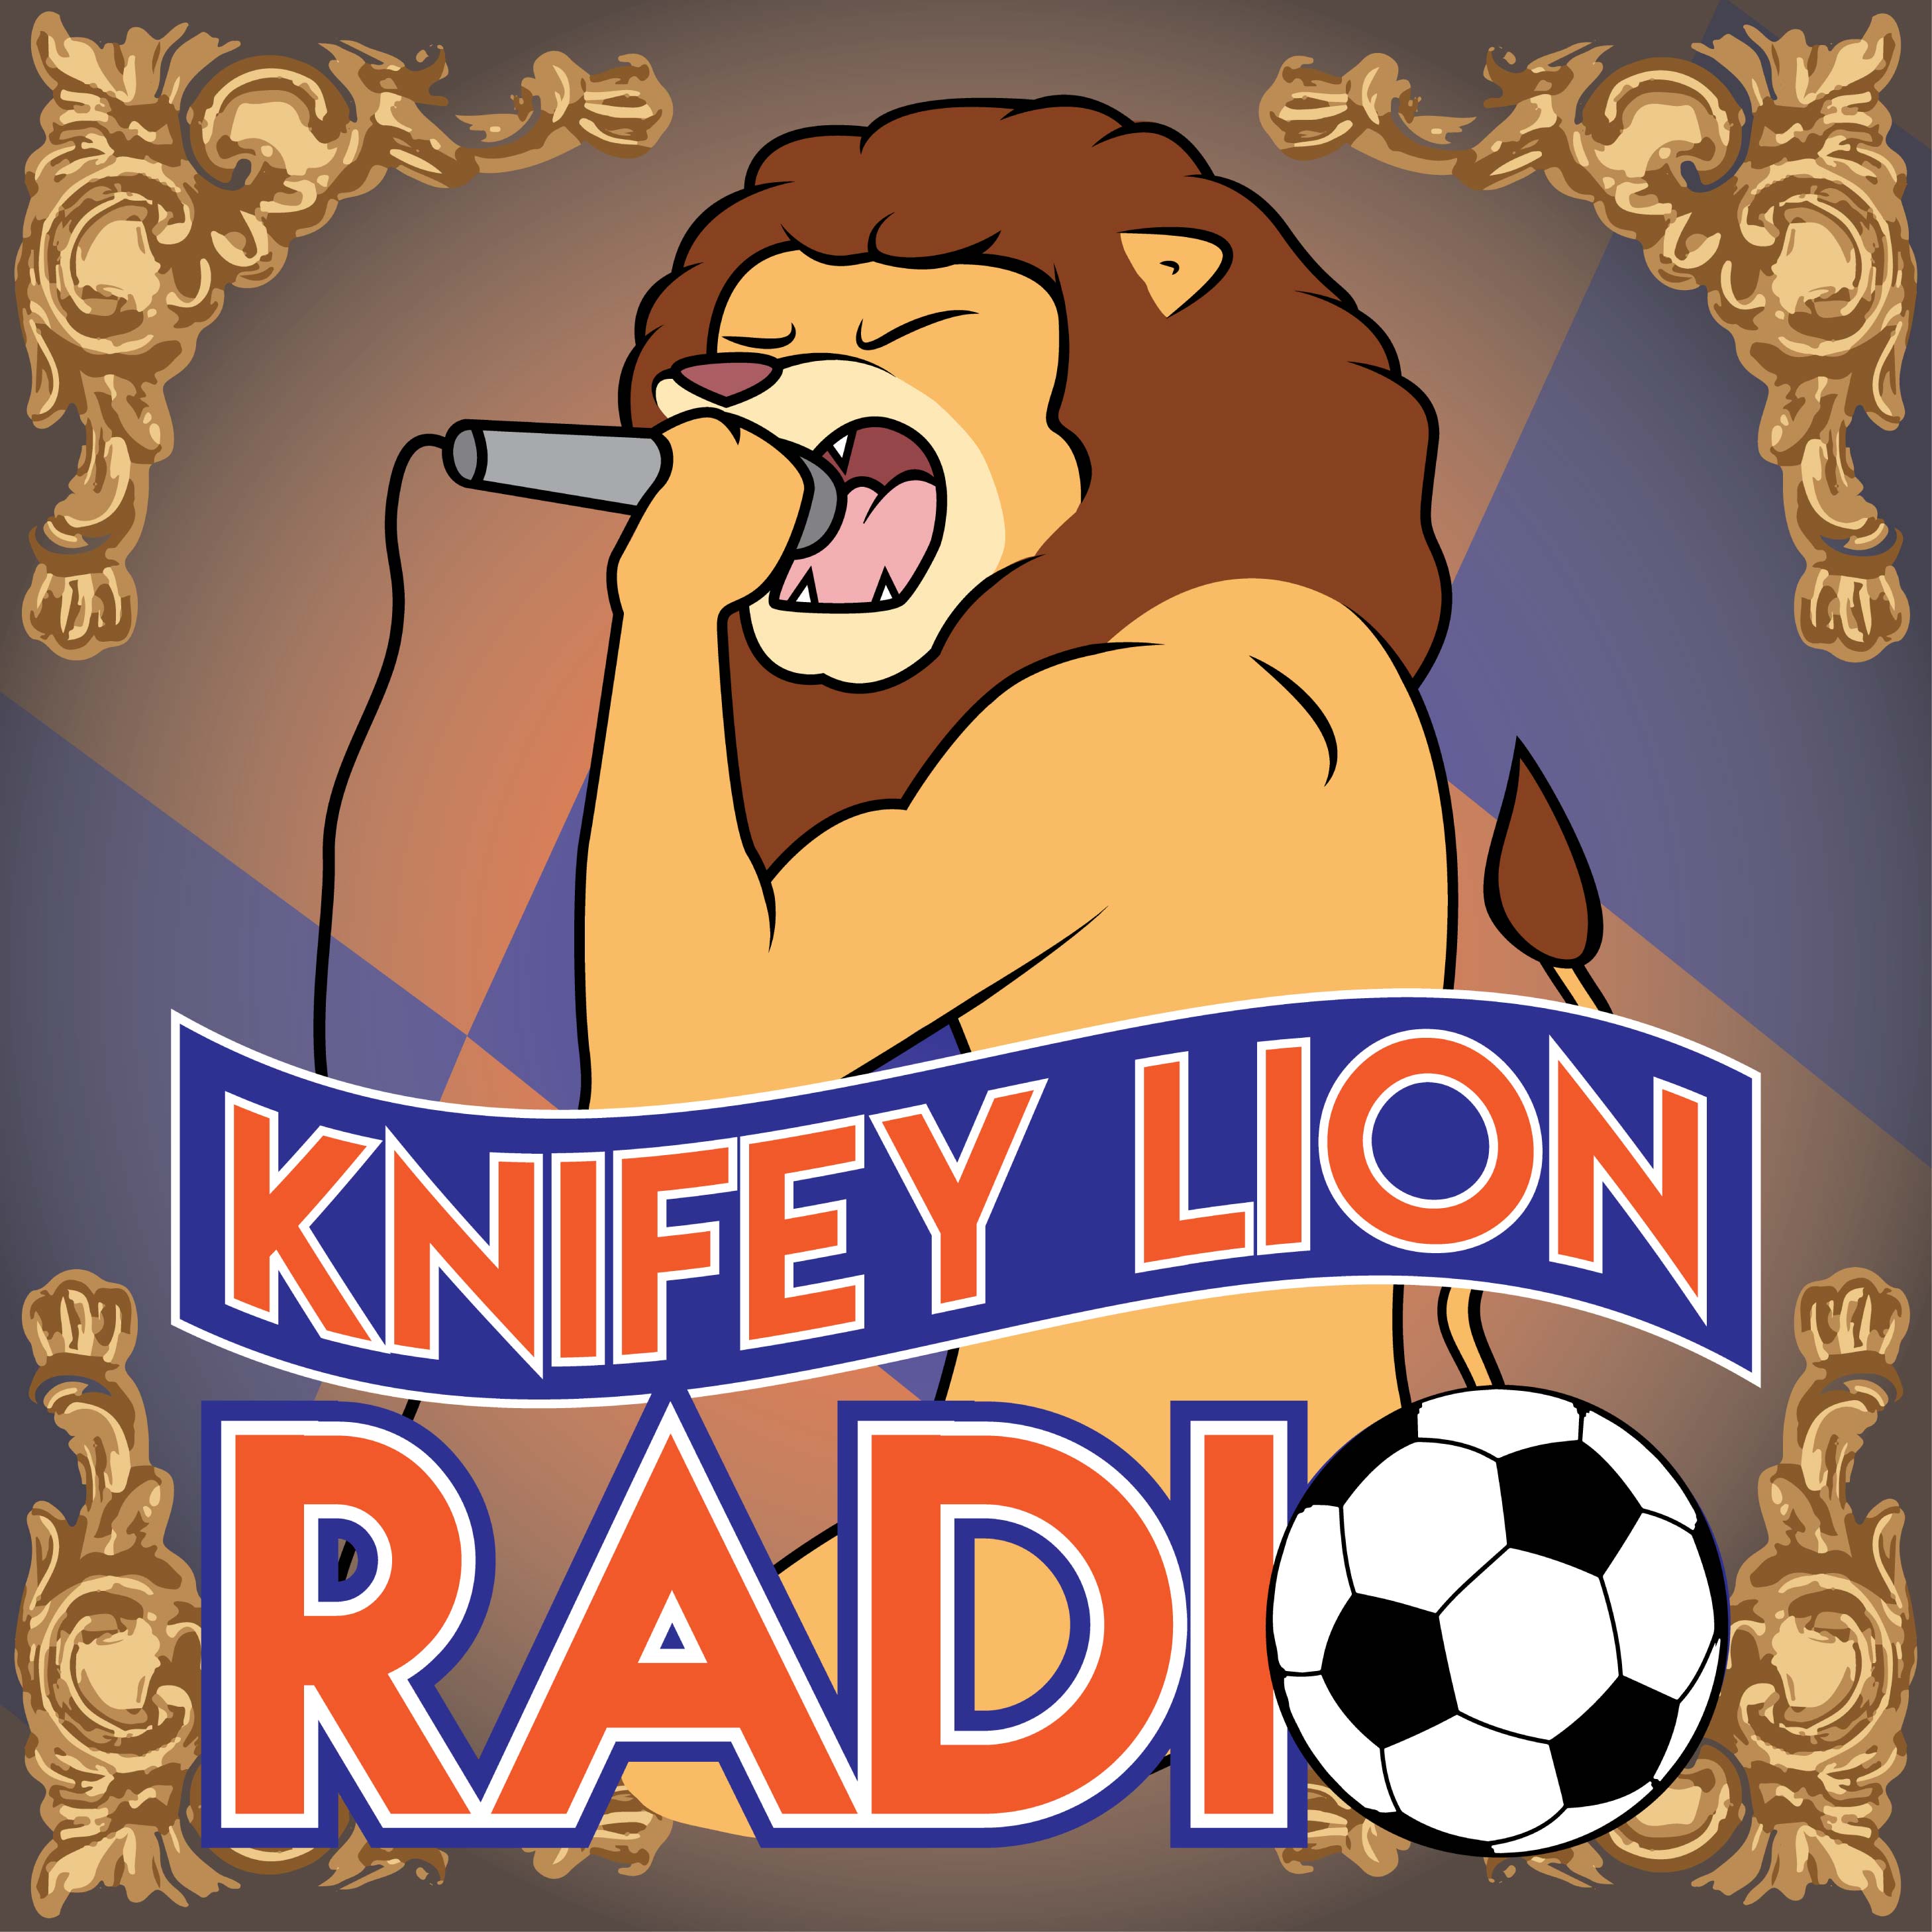 Episode 3 - 4/2/18 - GAME TWO! Road Warriors! Indy Eleven recap and MORE!